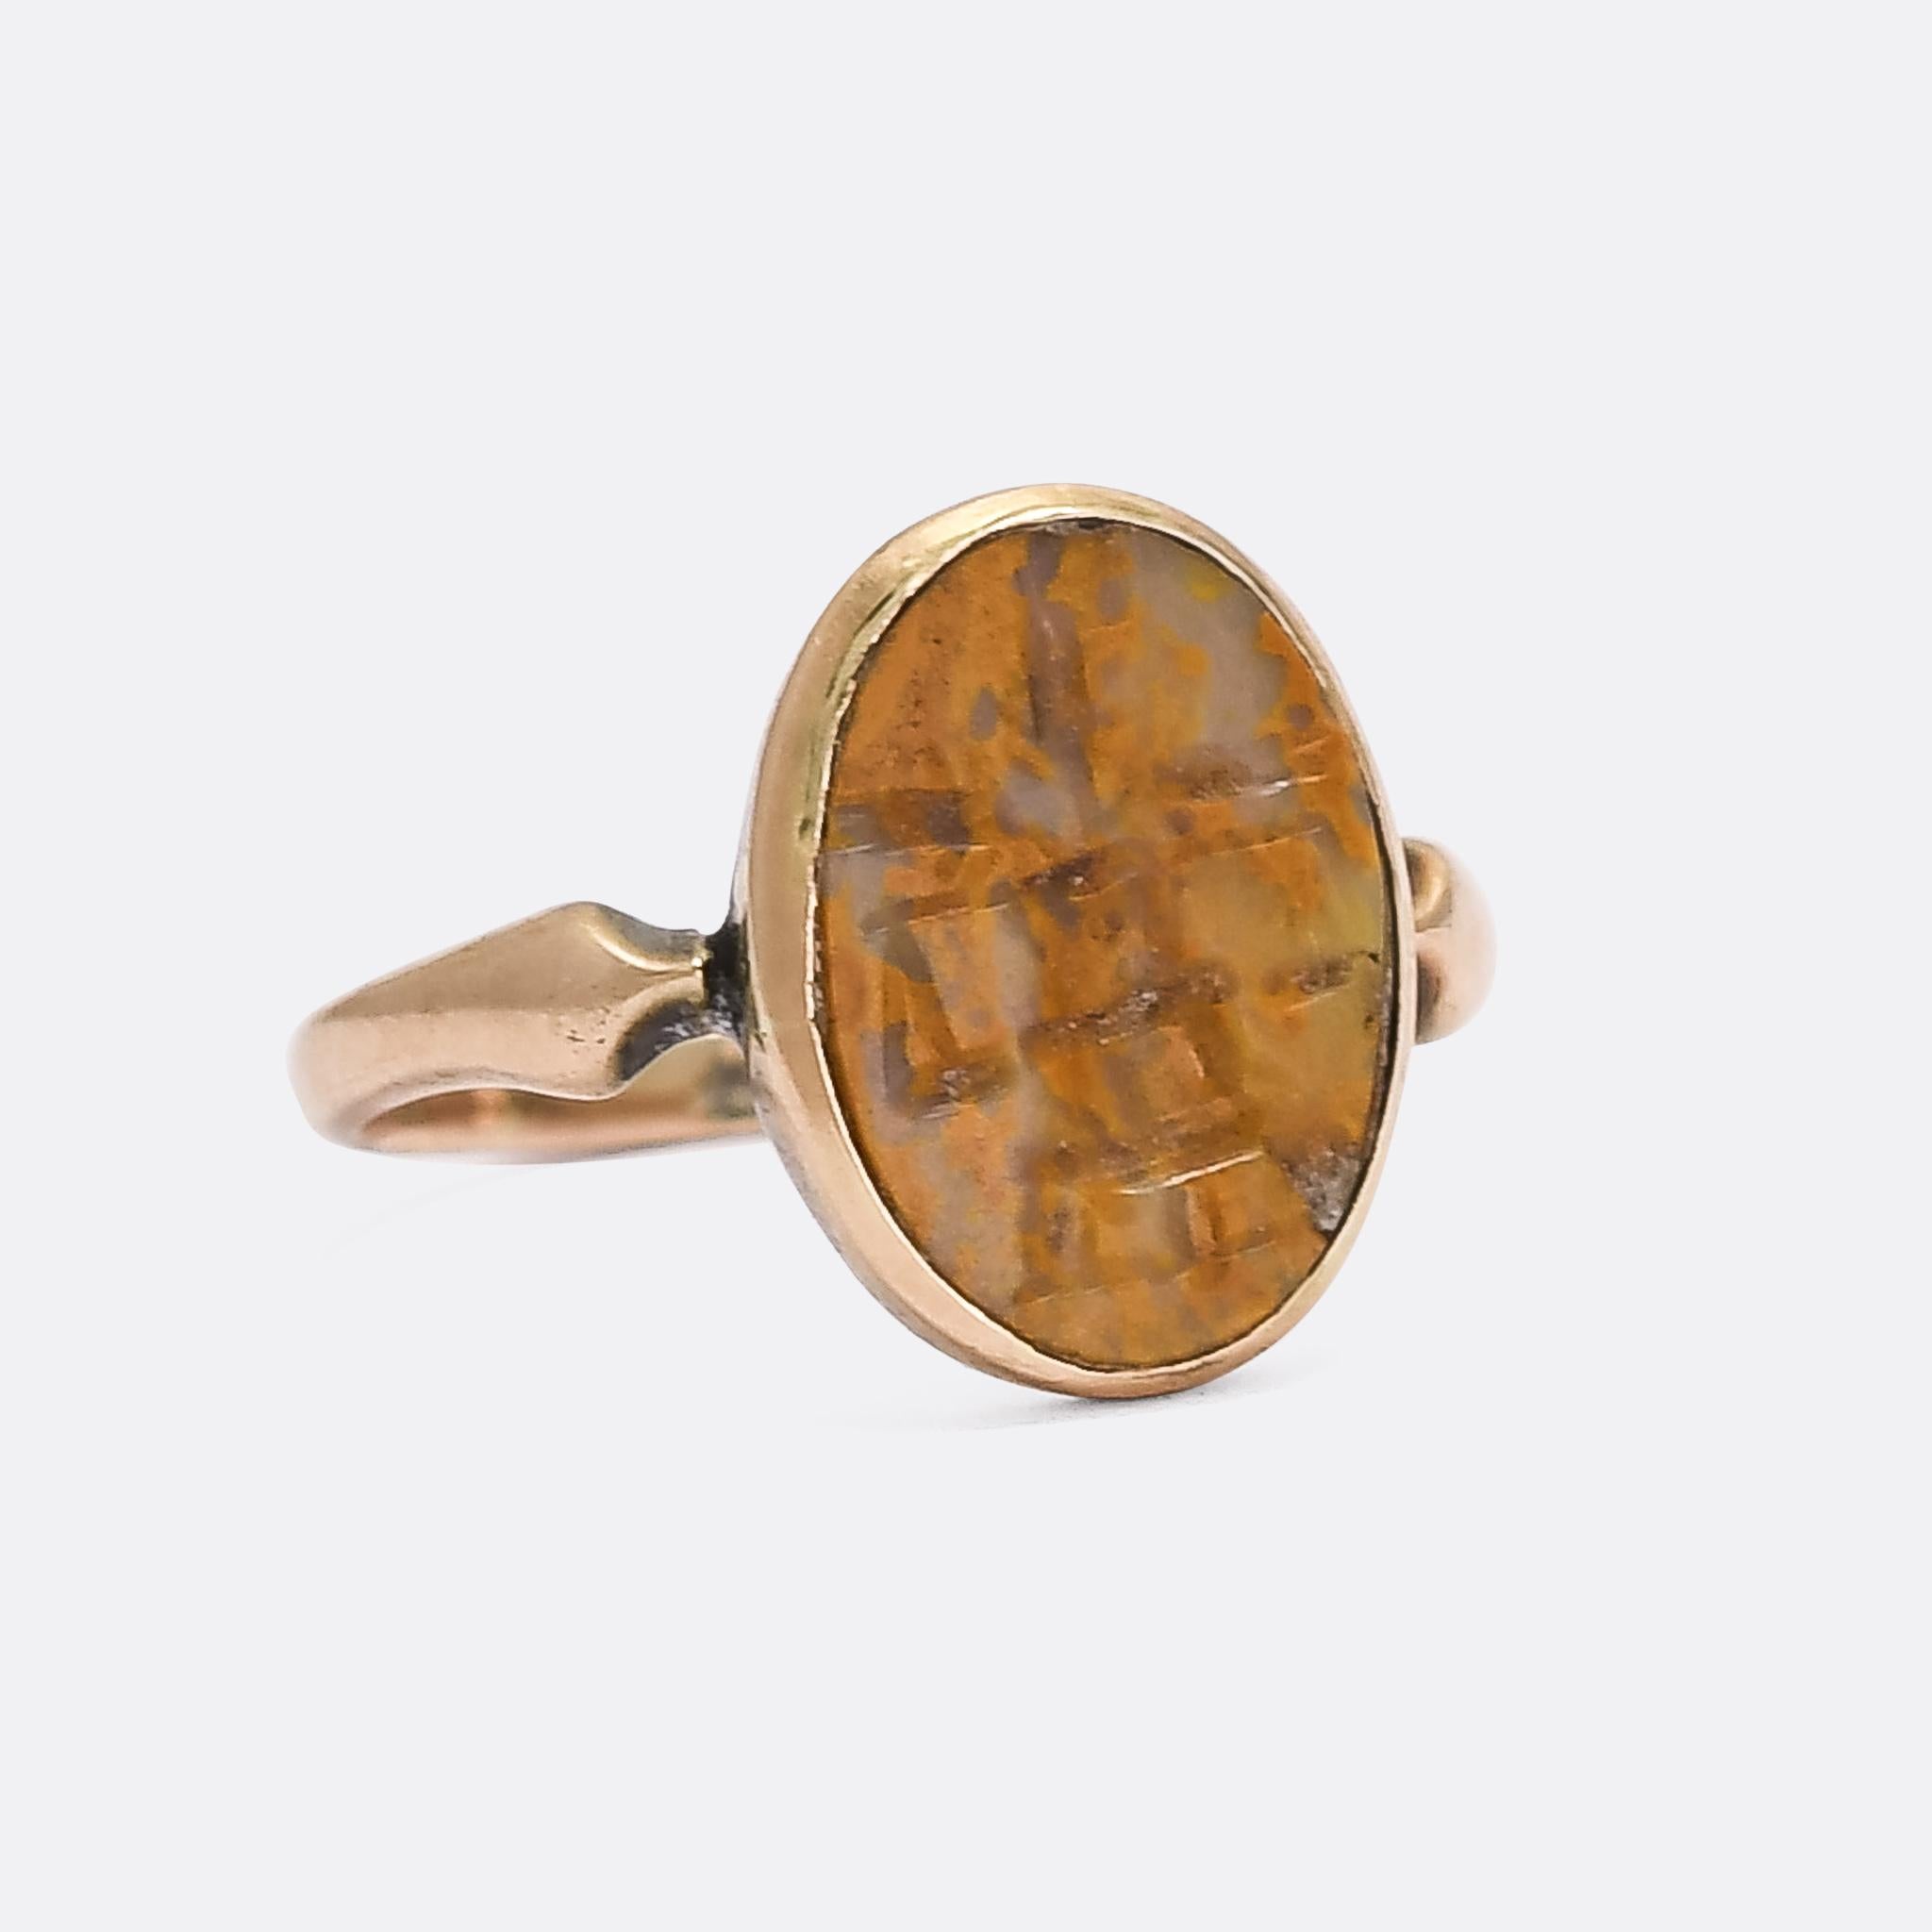 Ring Mount Victorian, c.1880 - Intaglio Roman, c.3rd Century AD

An intriguing antique signet ring with ancient Roman intaglio dating from the 3rd Century AD. I believe (although without certainty) that it represents the goddess Ceres, with wheat